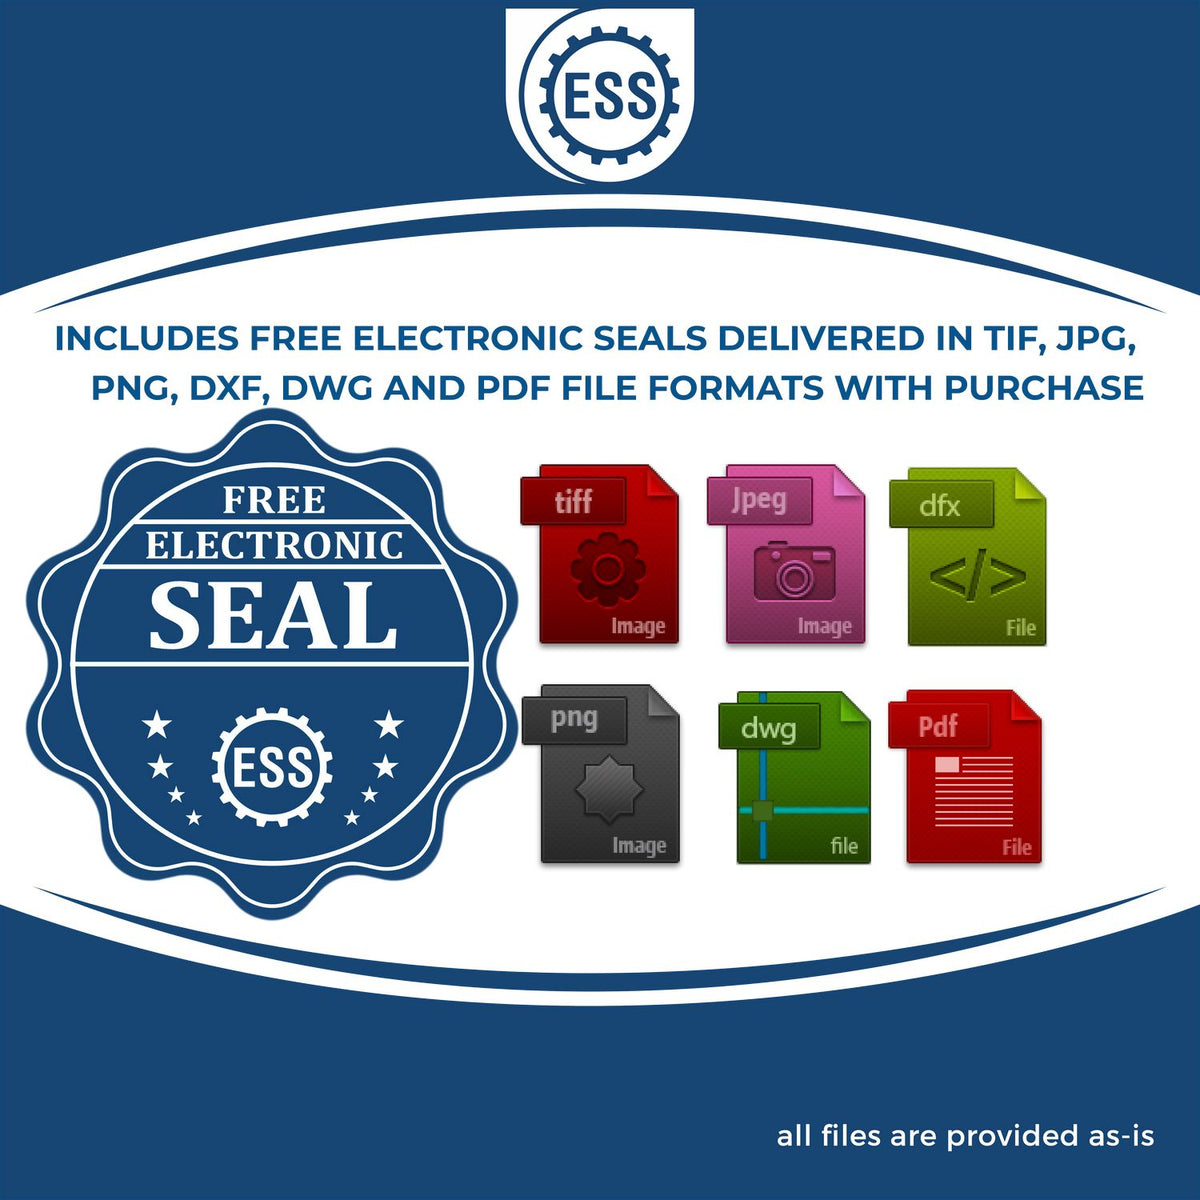 An infographic for the free electronic seal for the Slim Pre-Inked Nebraska Landscape Architect Seal Stamp illustrating the different file type icons such as DXF, DWG, TIF, JPG and PNG.